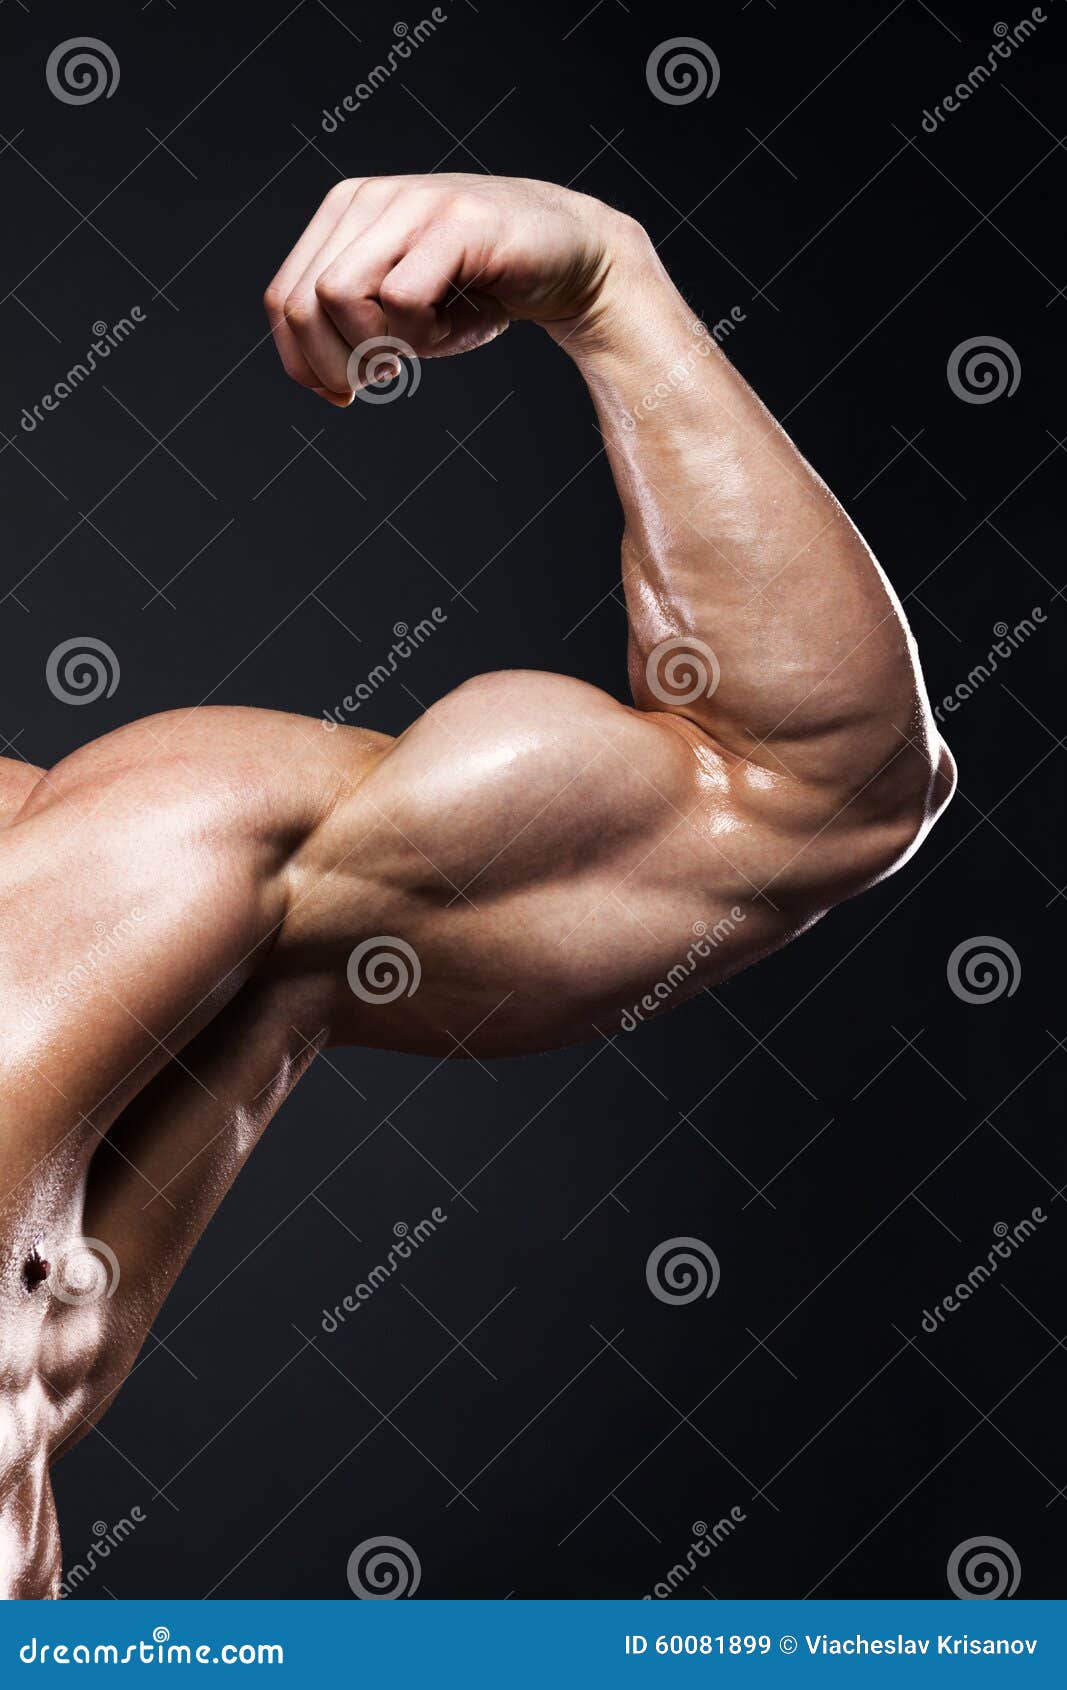 Muscular Human Male Arm from Front View Stock Image - Image of build ...